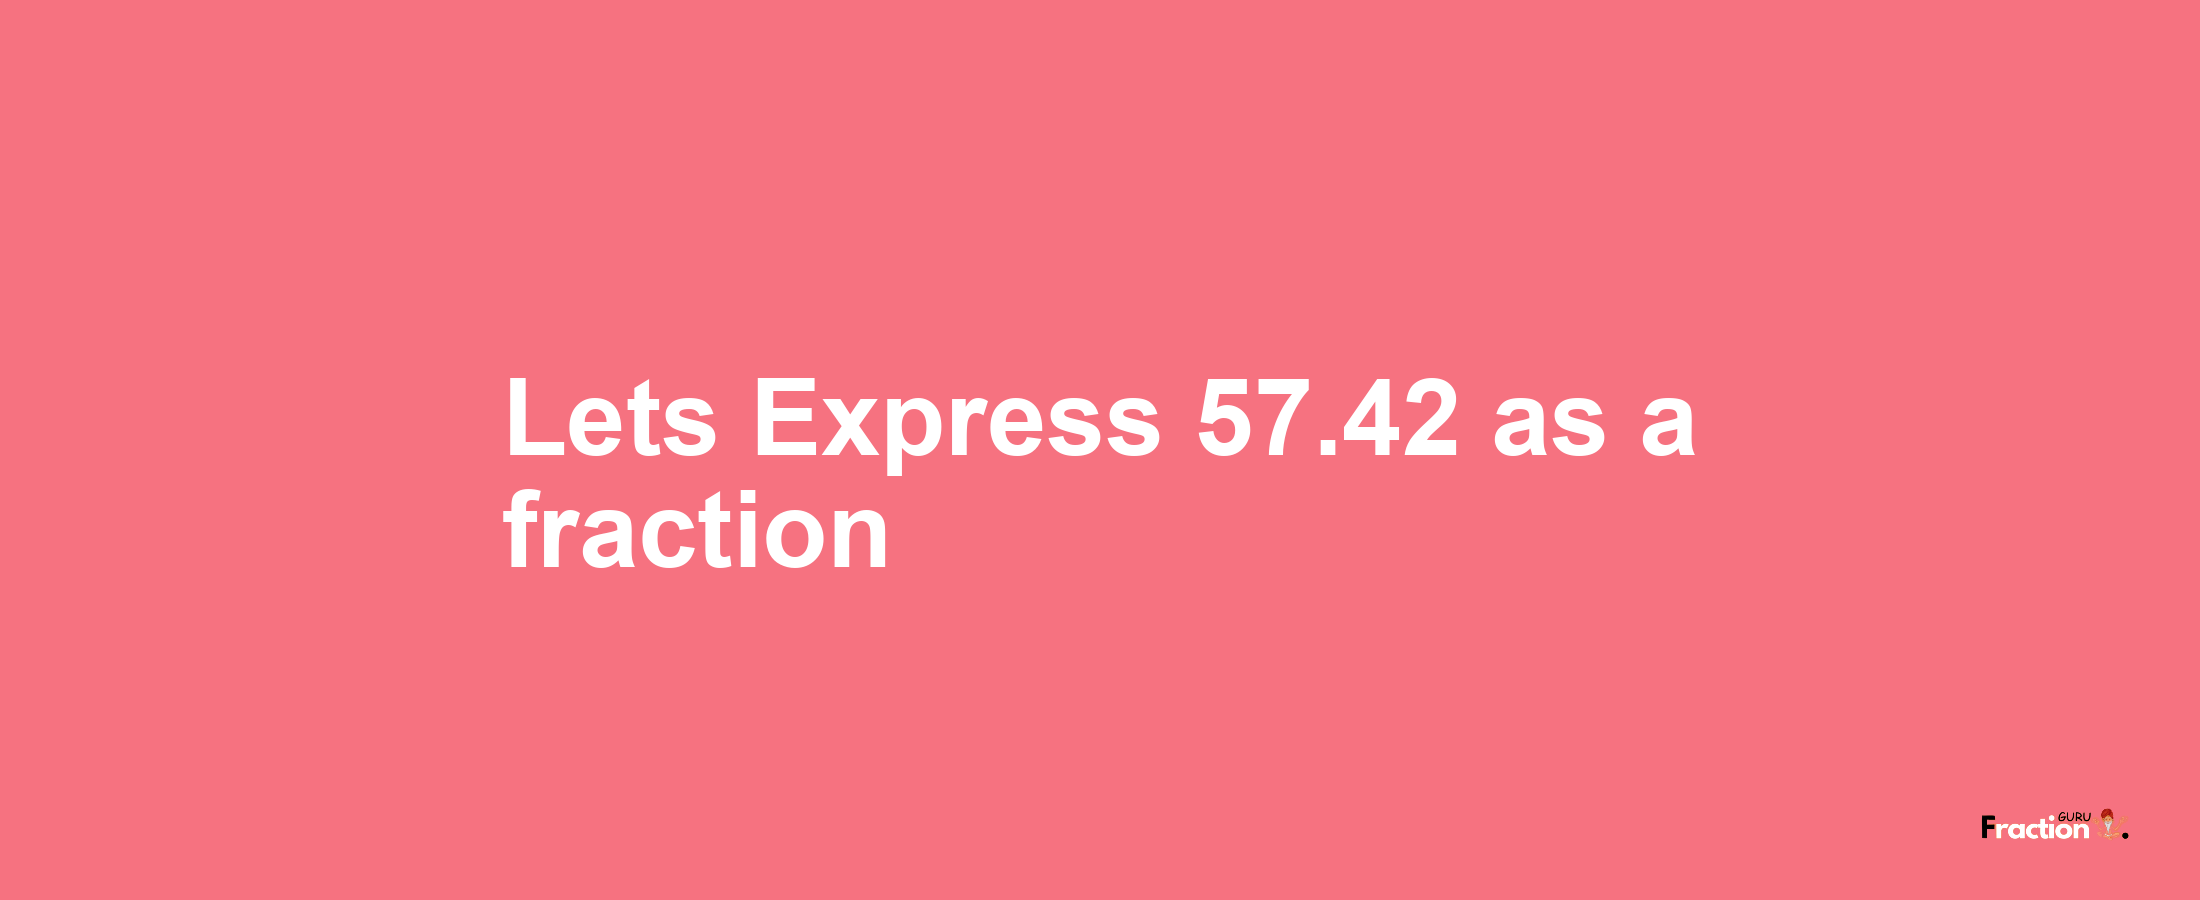 Lets Express 57.42 as afraction